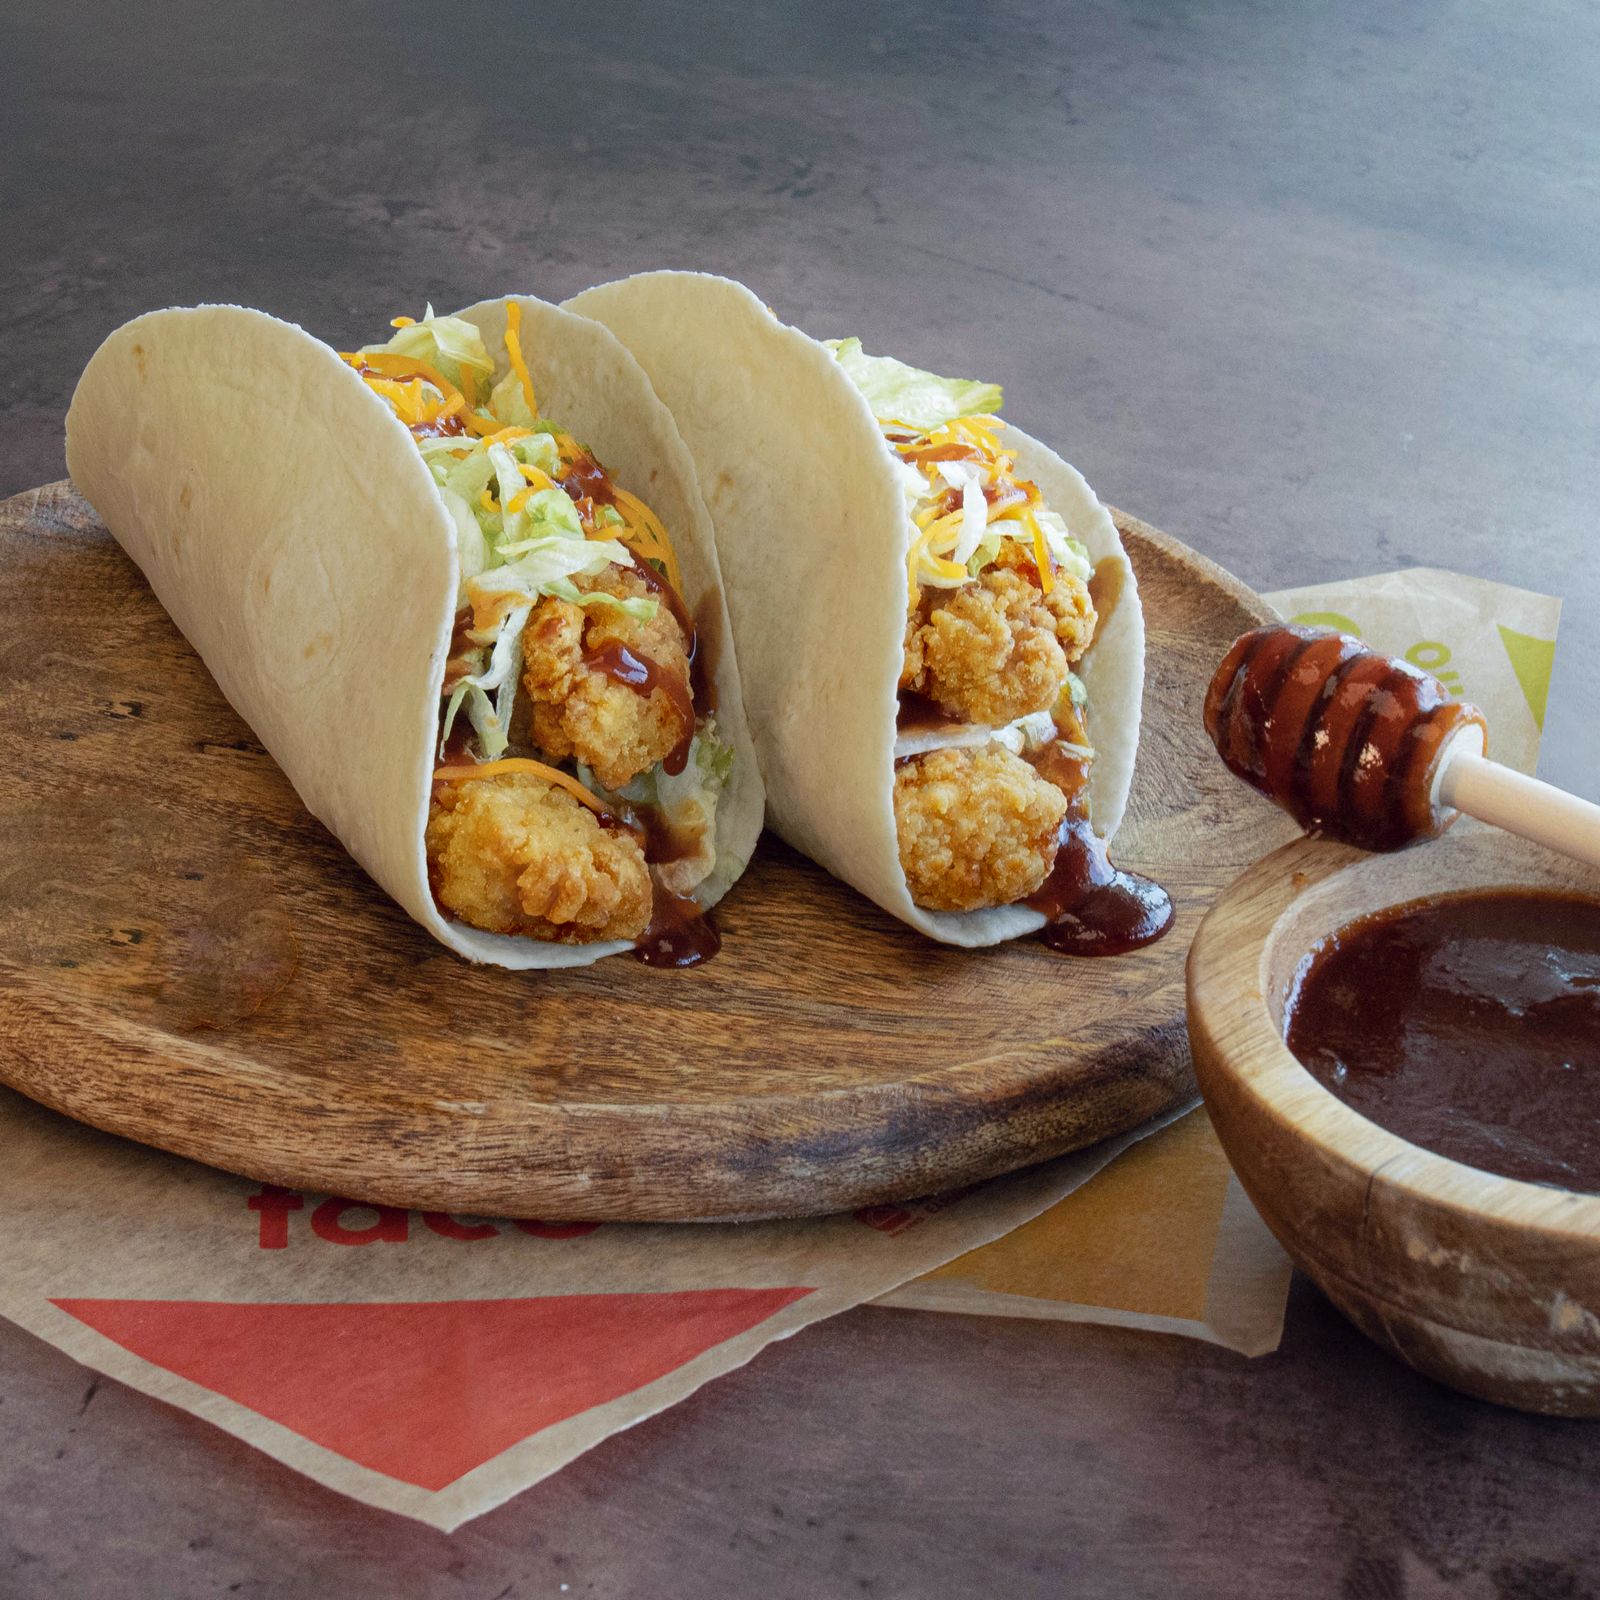 Saddle Up for the New Honey BBQ Fried Chicken Taco at Taco John's